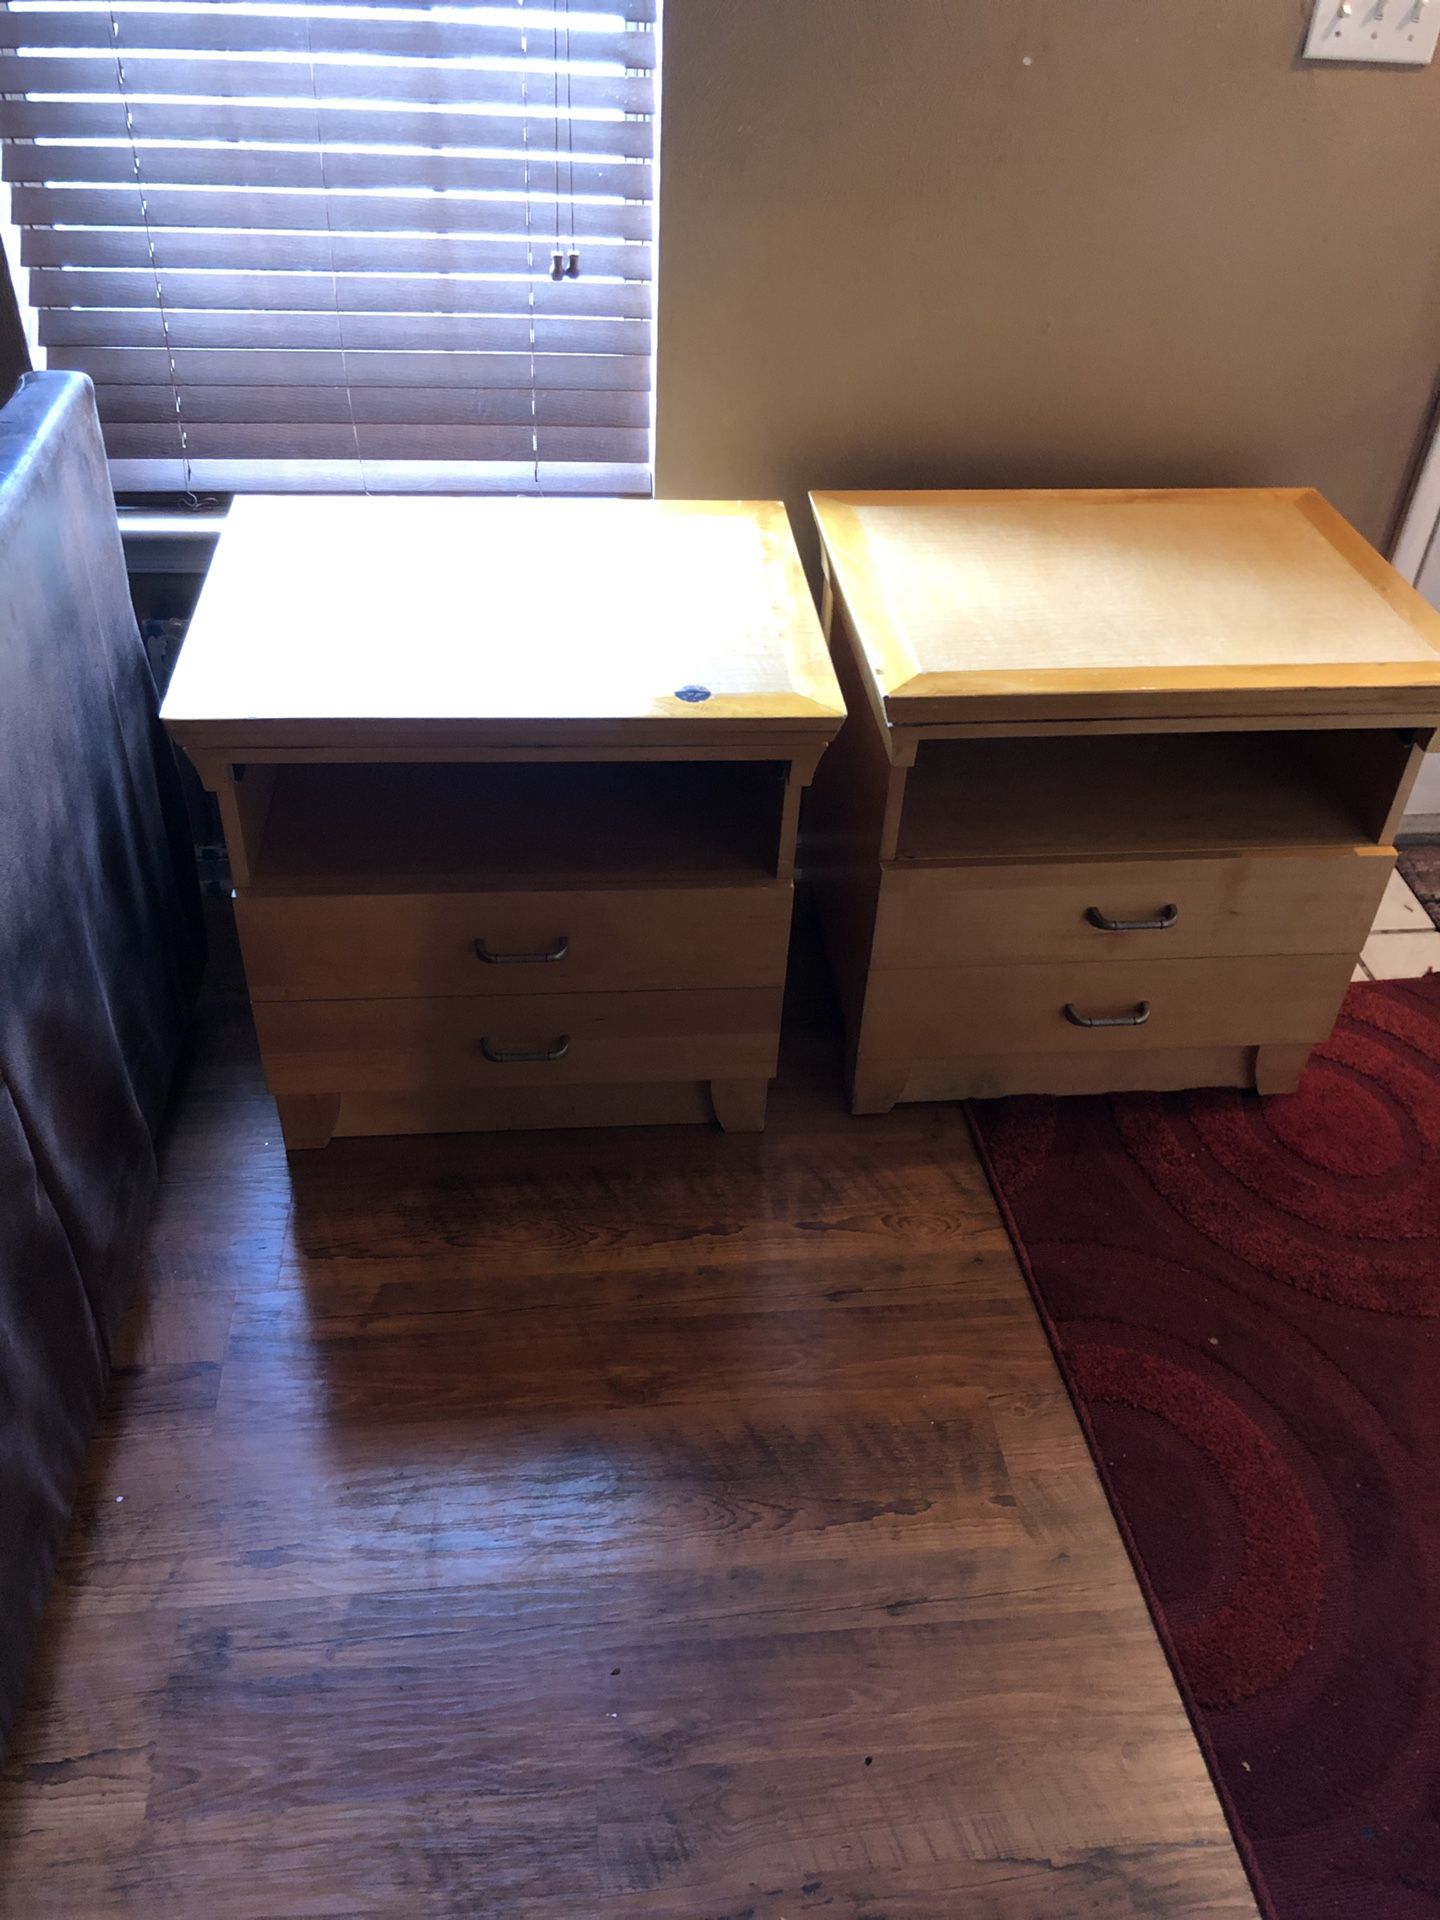 2 wood night stands